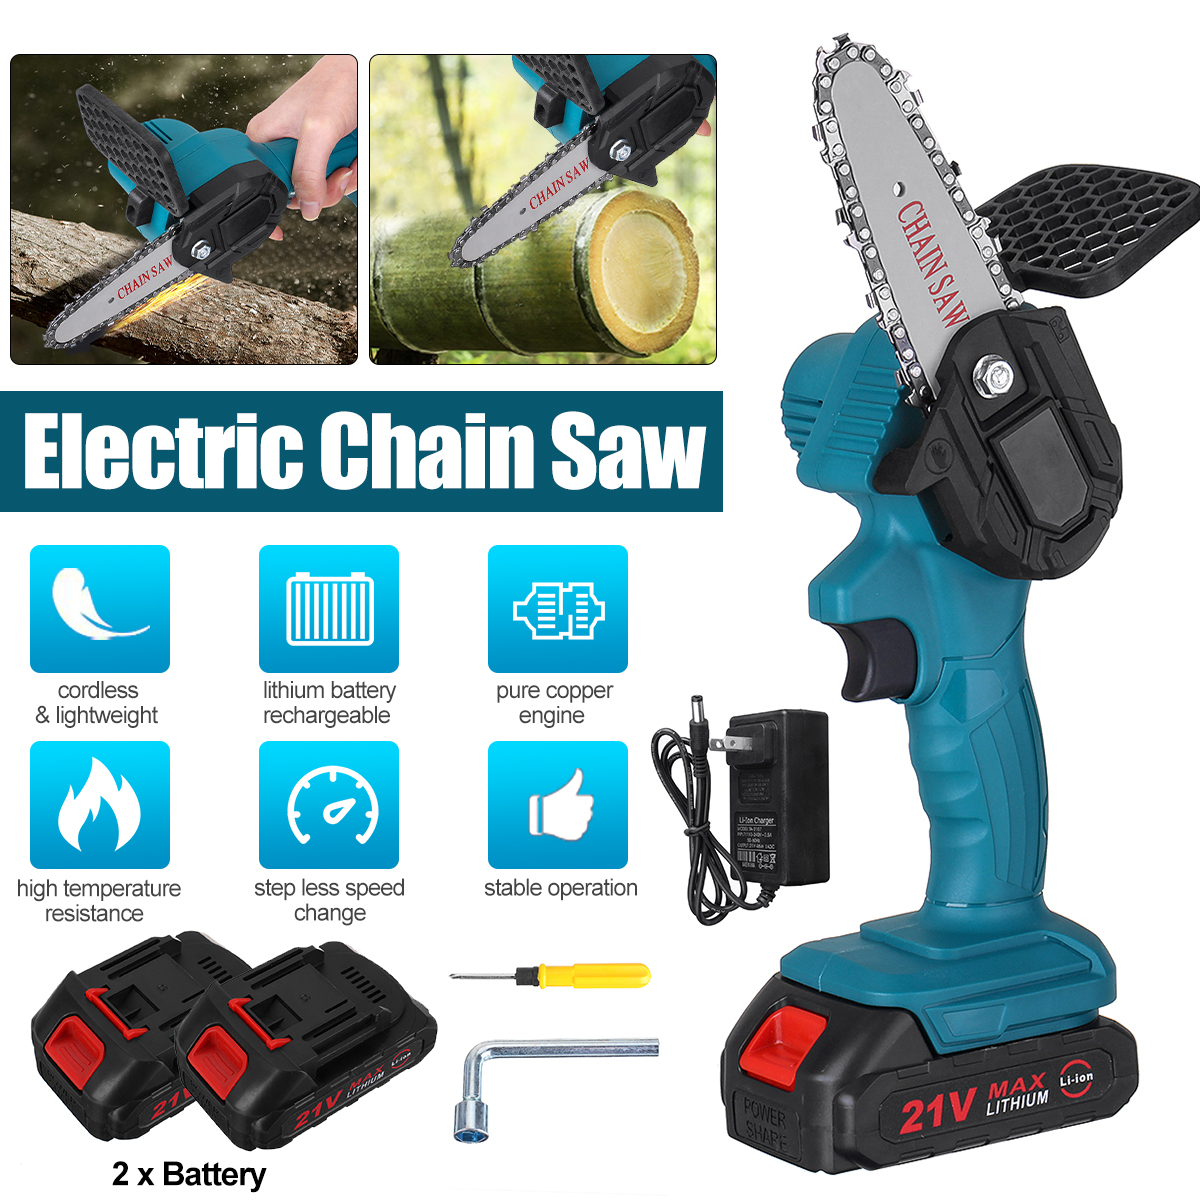 4-Inch-21V-Cordless-Electric-Chain-Saw-W-01pc2pcs-Batteries-For-Tree-Branch-Wood-Cutting-Tool-1805148-2